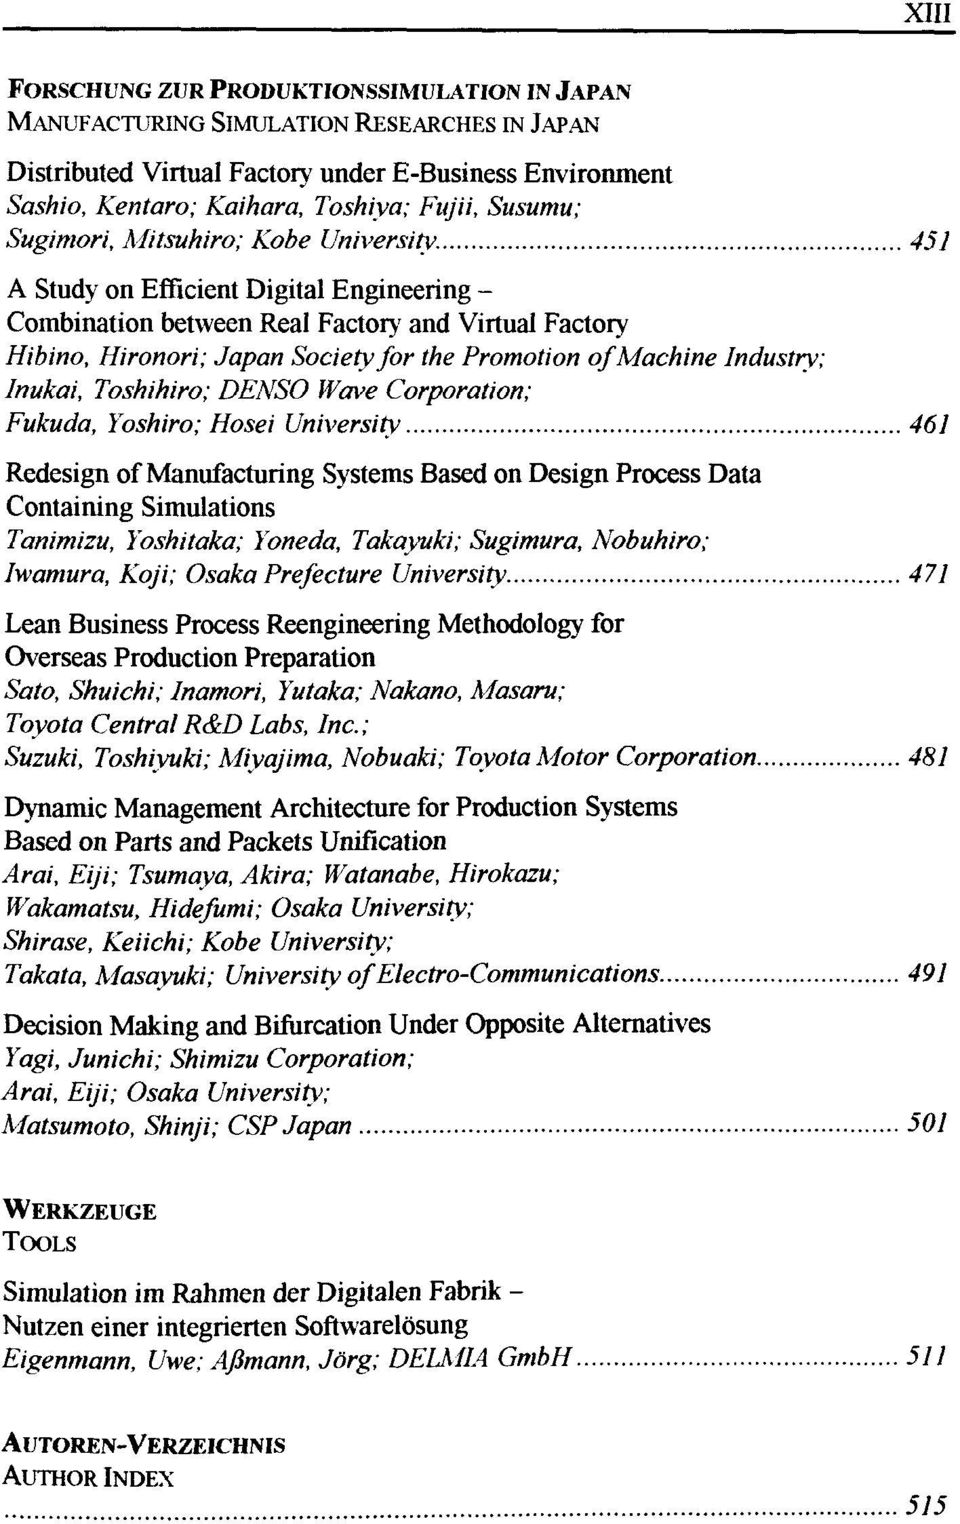 451 A Study on Efficient Digital Engineering - Combination between Real Factory and Virtual Factory Hibino, Hironori; Japan Society for the Promotion of Machine Industry; Inukai, Toshihiro; DENSO